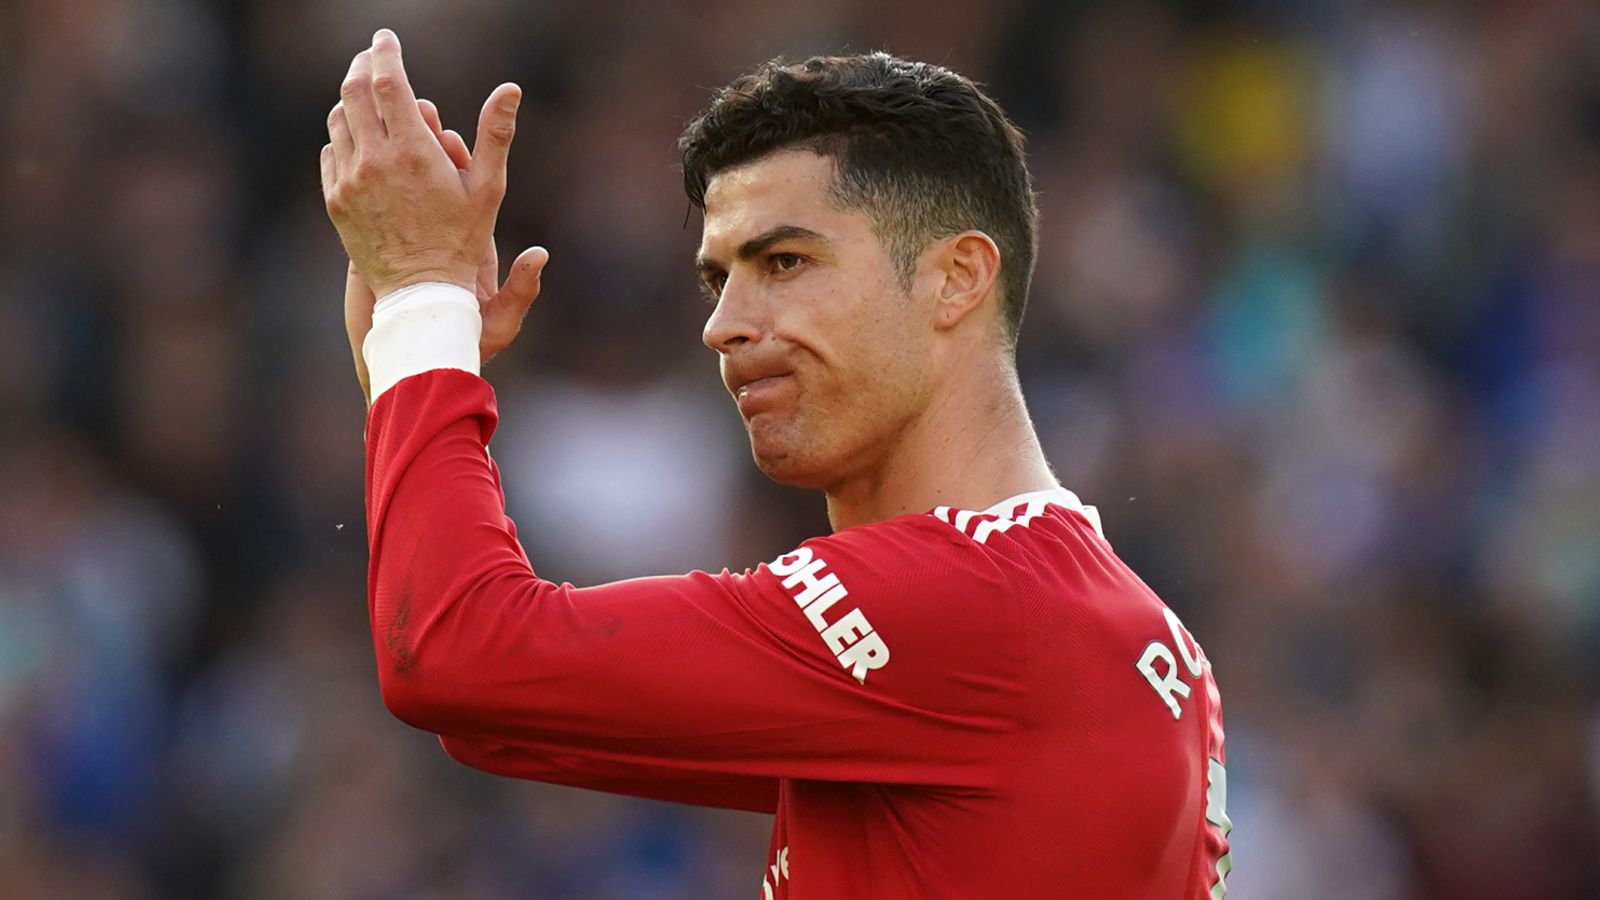 Cristiano Ronaldo Expected To Stay At Man Utd This Summer Despite Reported Frustration Over Lack Of Transfers